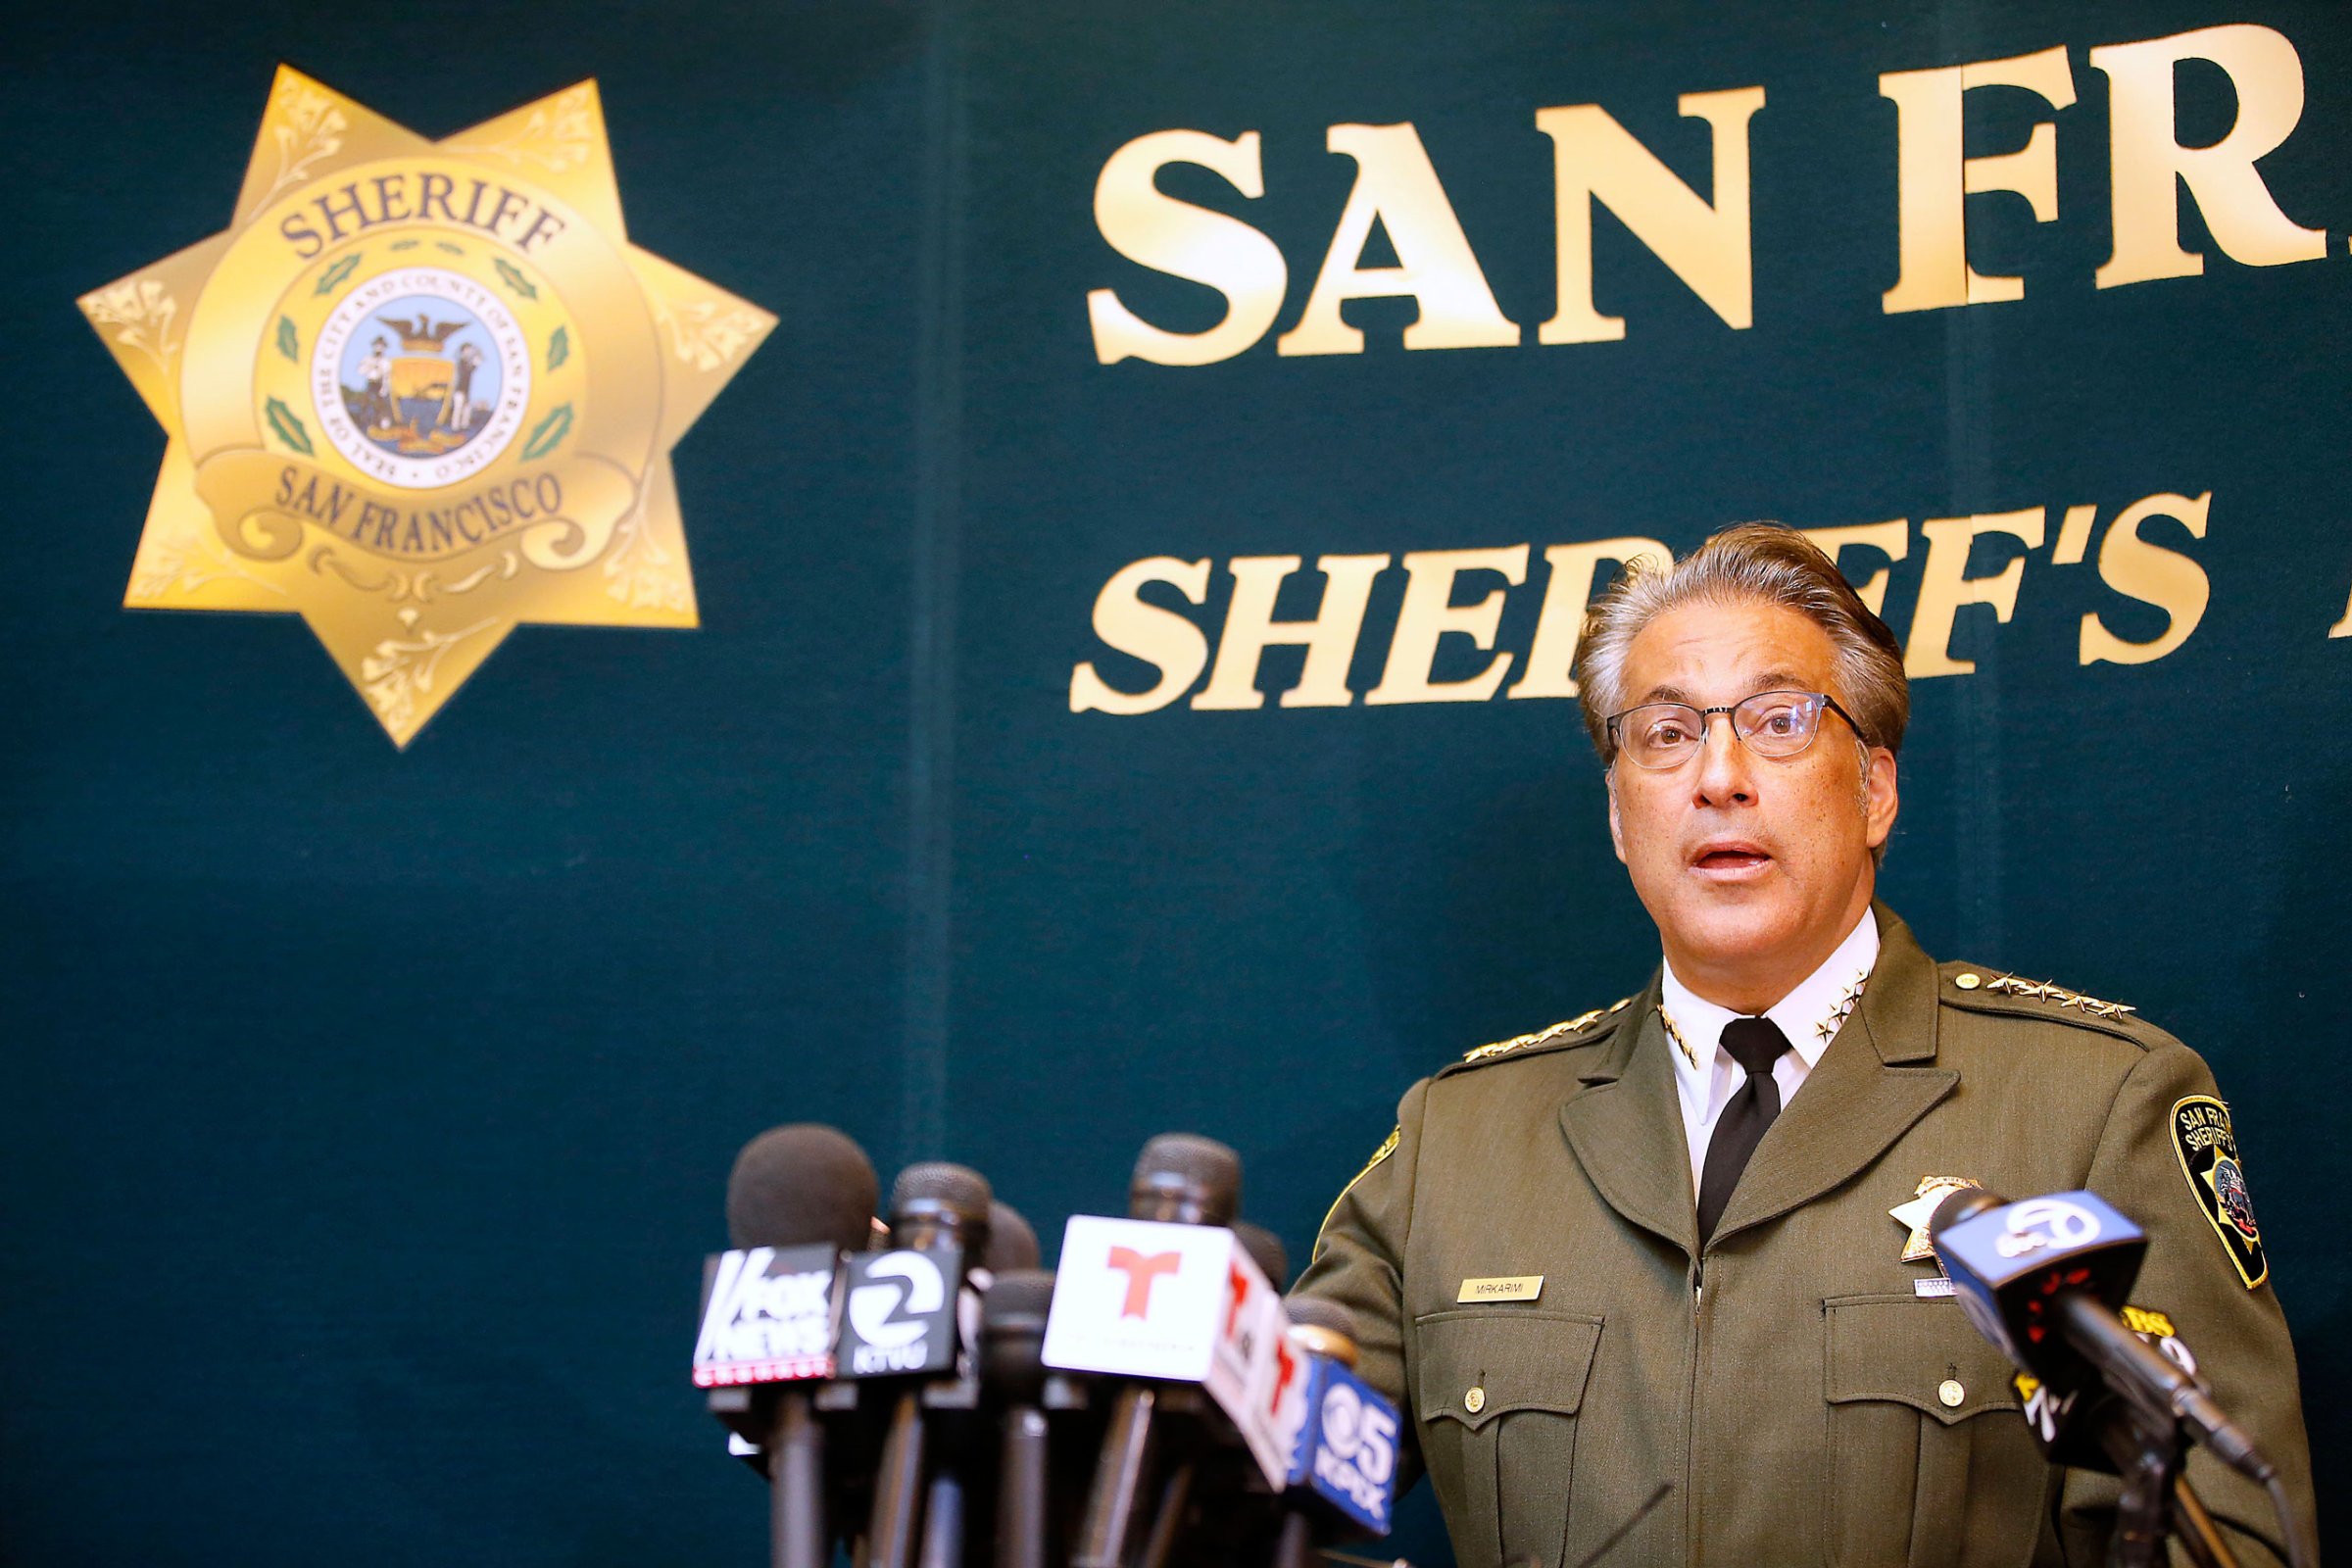 San Francisco Sheriff Ross Mirkarimi fields questions during a news conference in San Francisco on July 10, 2015, in San Francisco. Mirkarimi provided information regarding the April 2015 release of Juan Francisco Lopez-Sanchez, who is now accused in the shooting death of a woman at a popular tourist site. (AP Photo/Tony Avelar)